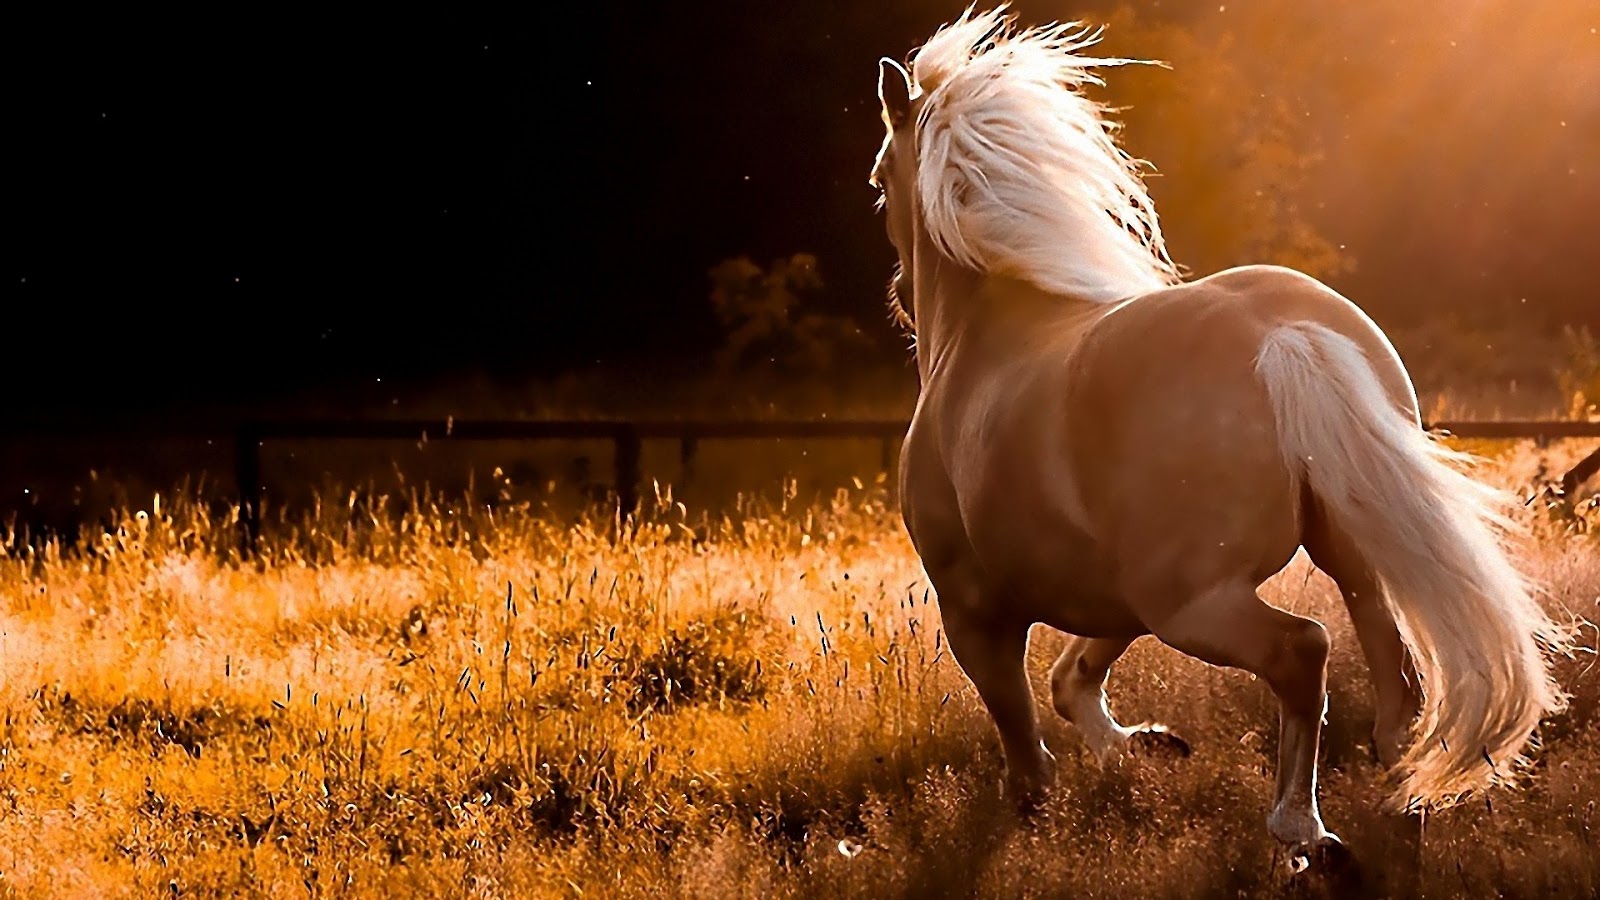 wallpapers are for free danish warmblood horse danish warmblood horse ...